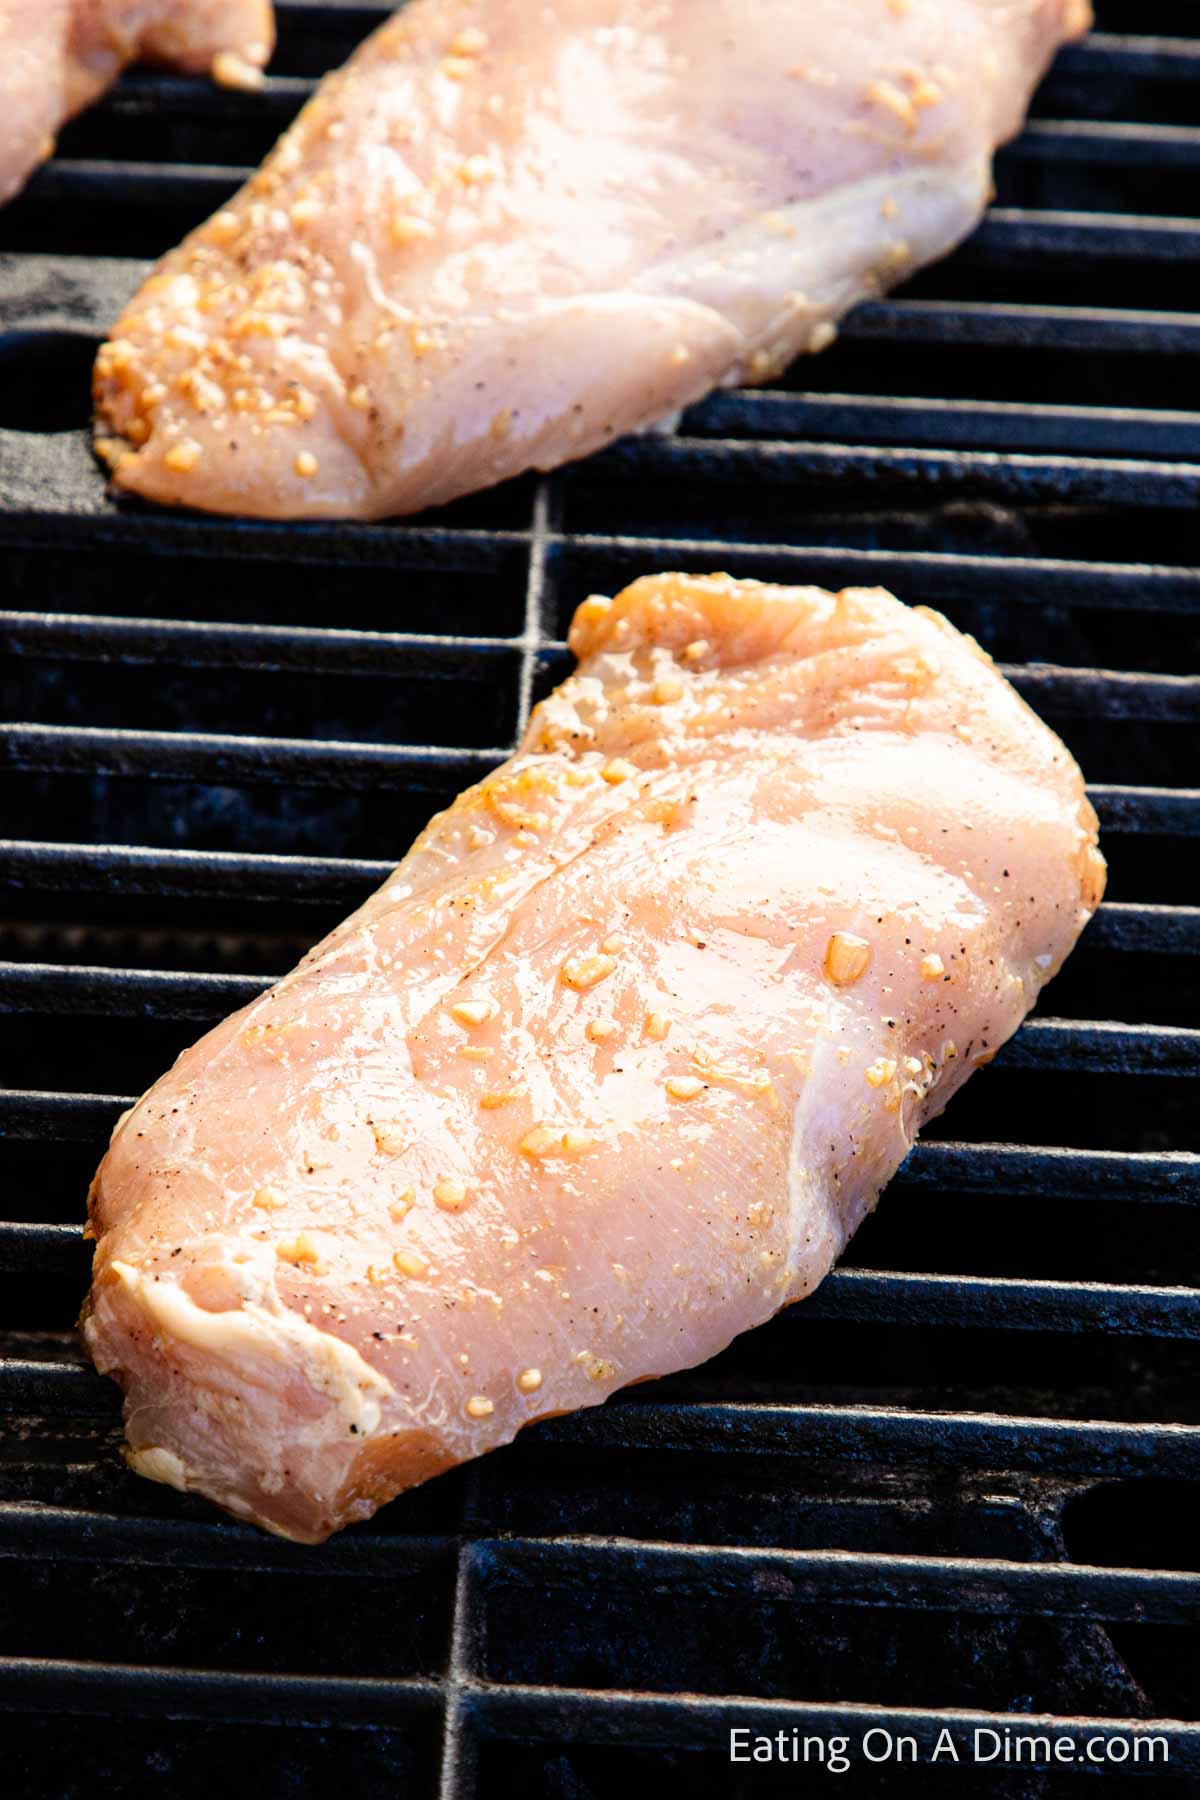 Placing marinated chicken breast on a grill grates